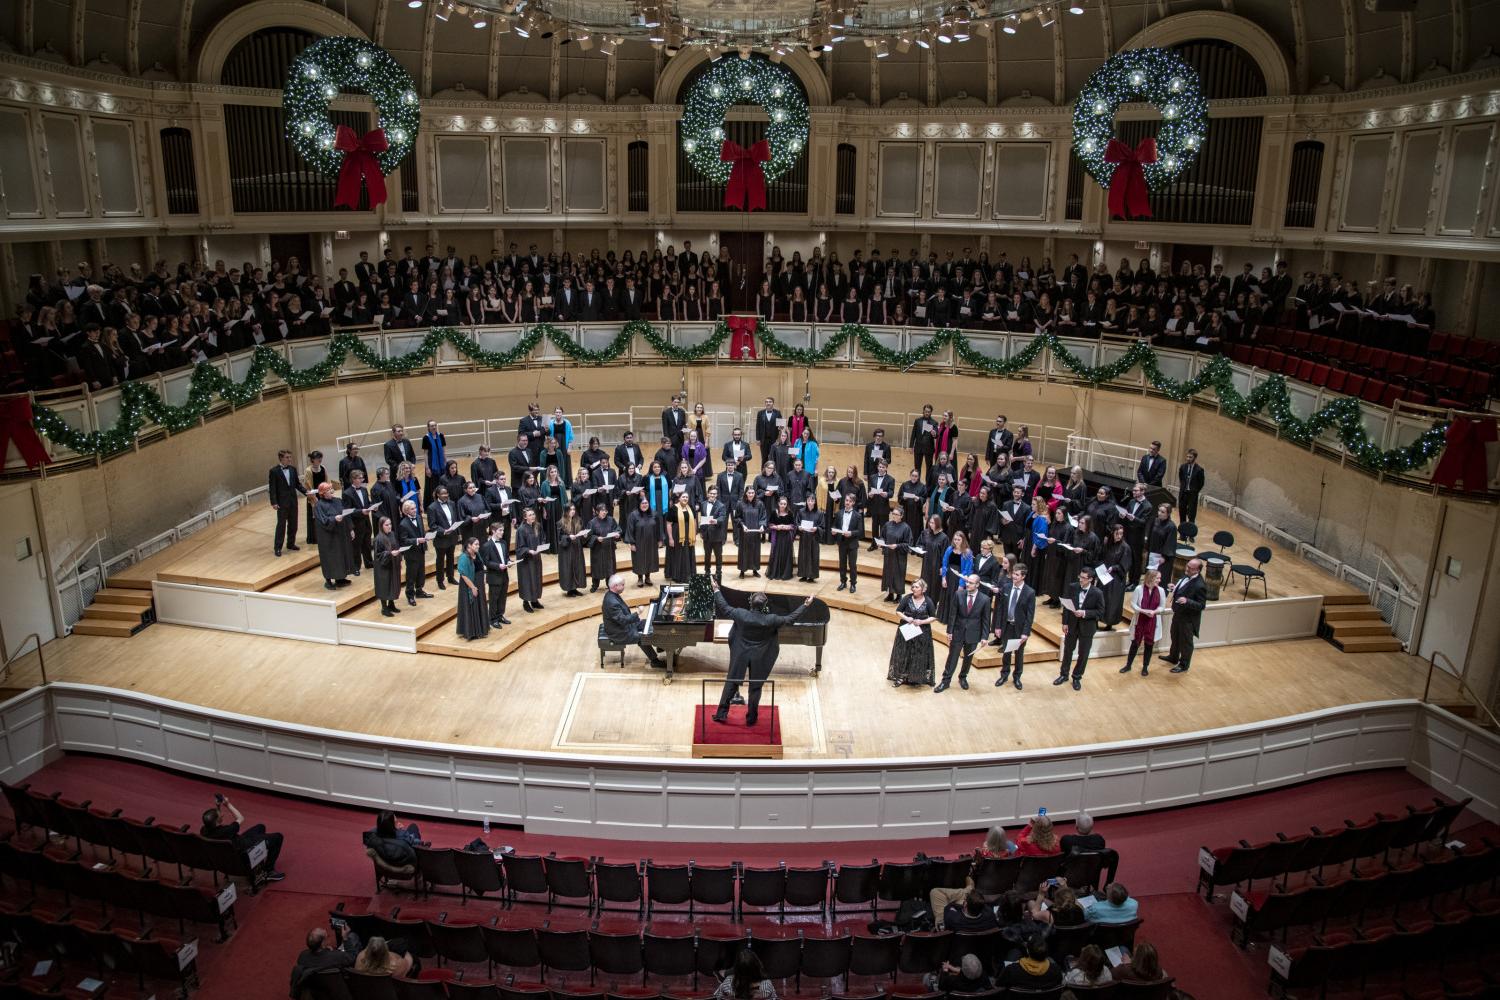 The <a href='http://hwod.3600151.com'>bv伟德ios下载</a> Choir performs in the Chicago Symphony Hall.